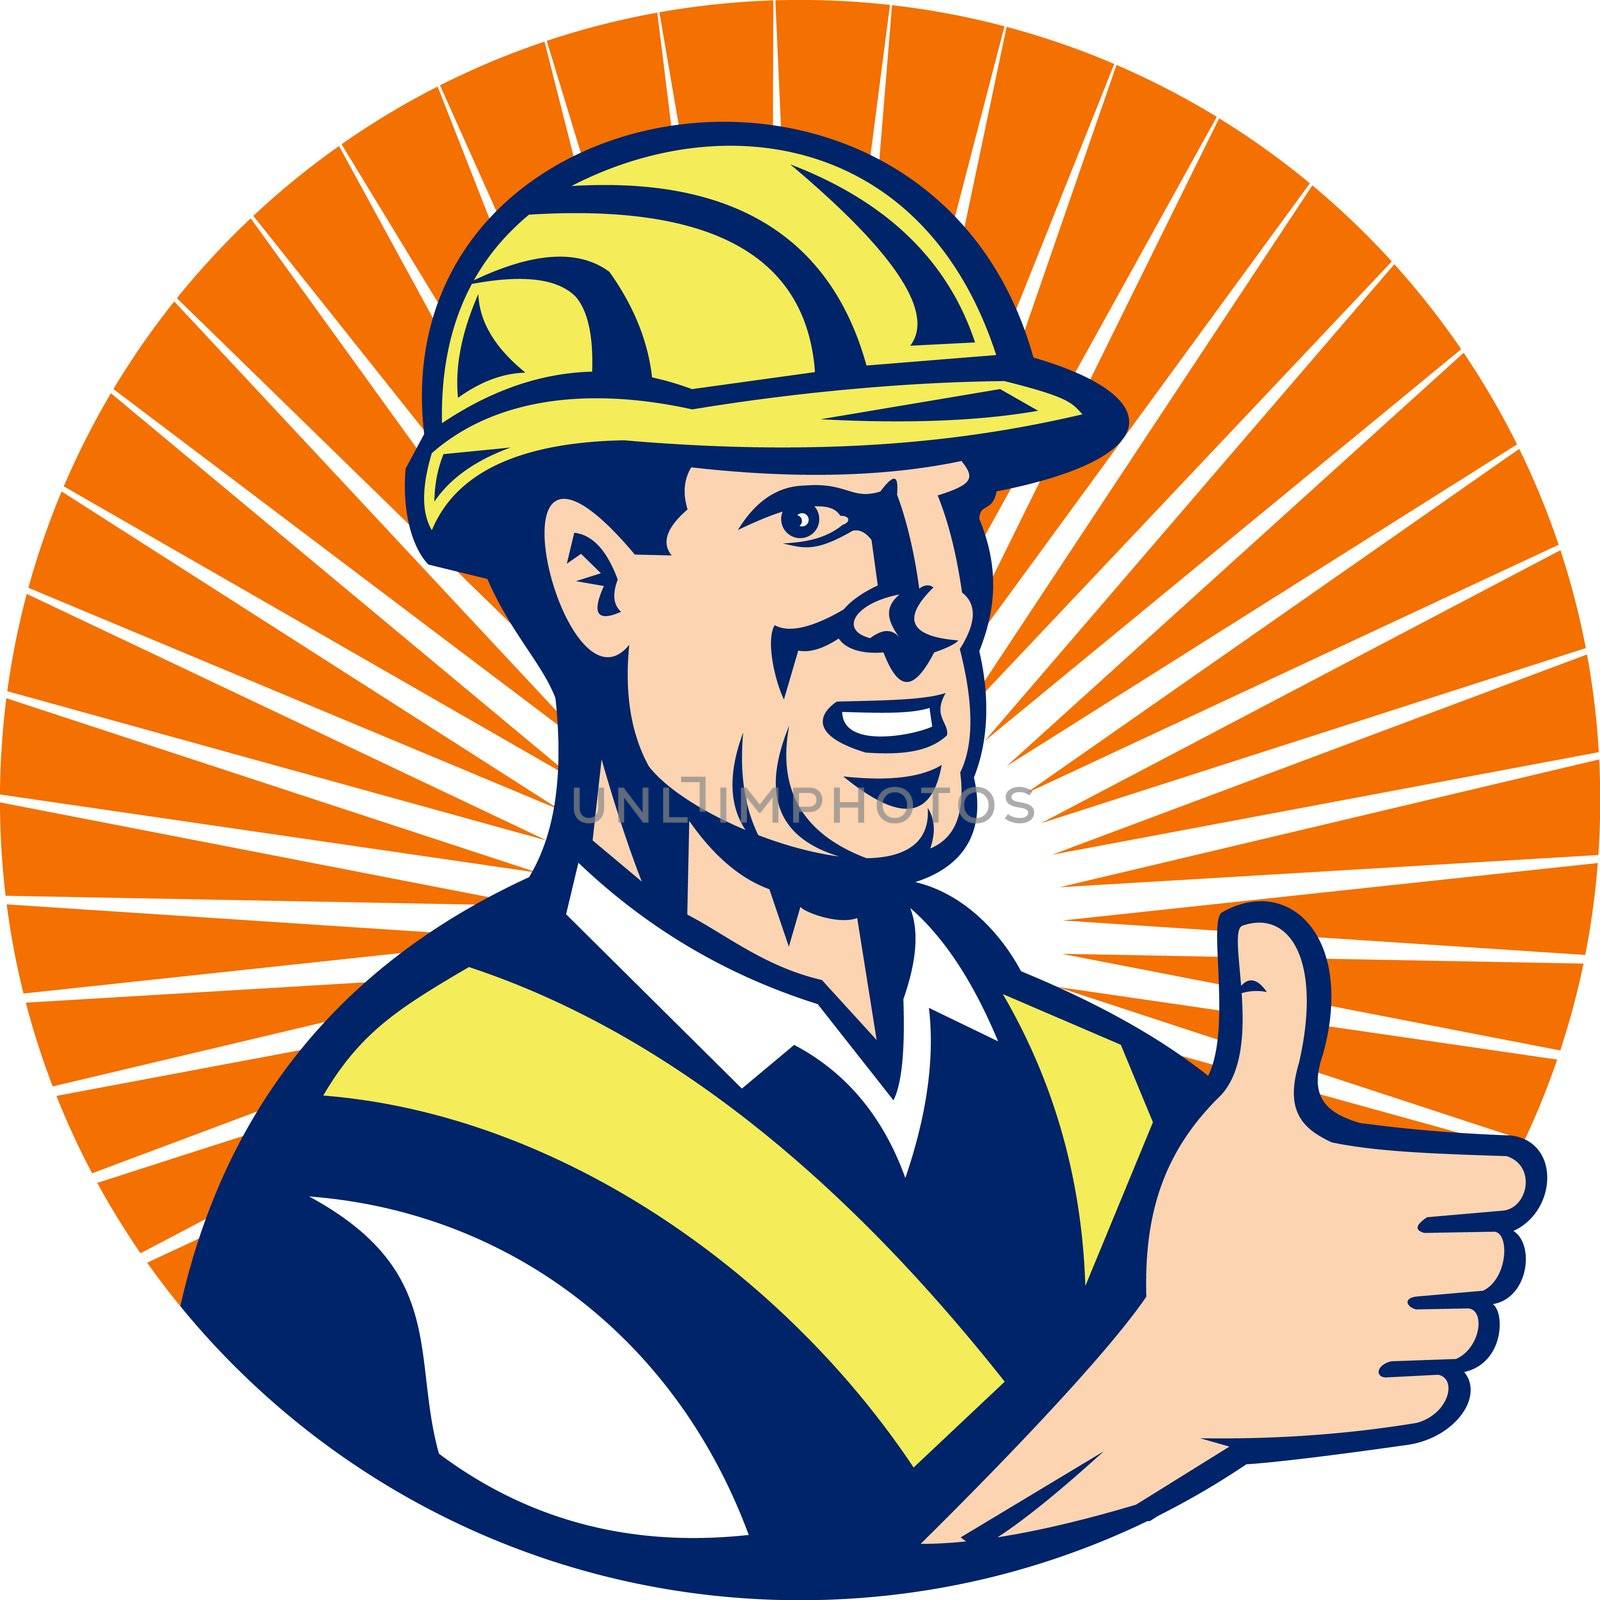 construction worker thumbs up by patrimonio